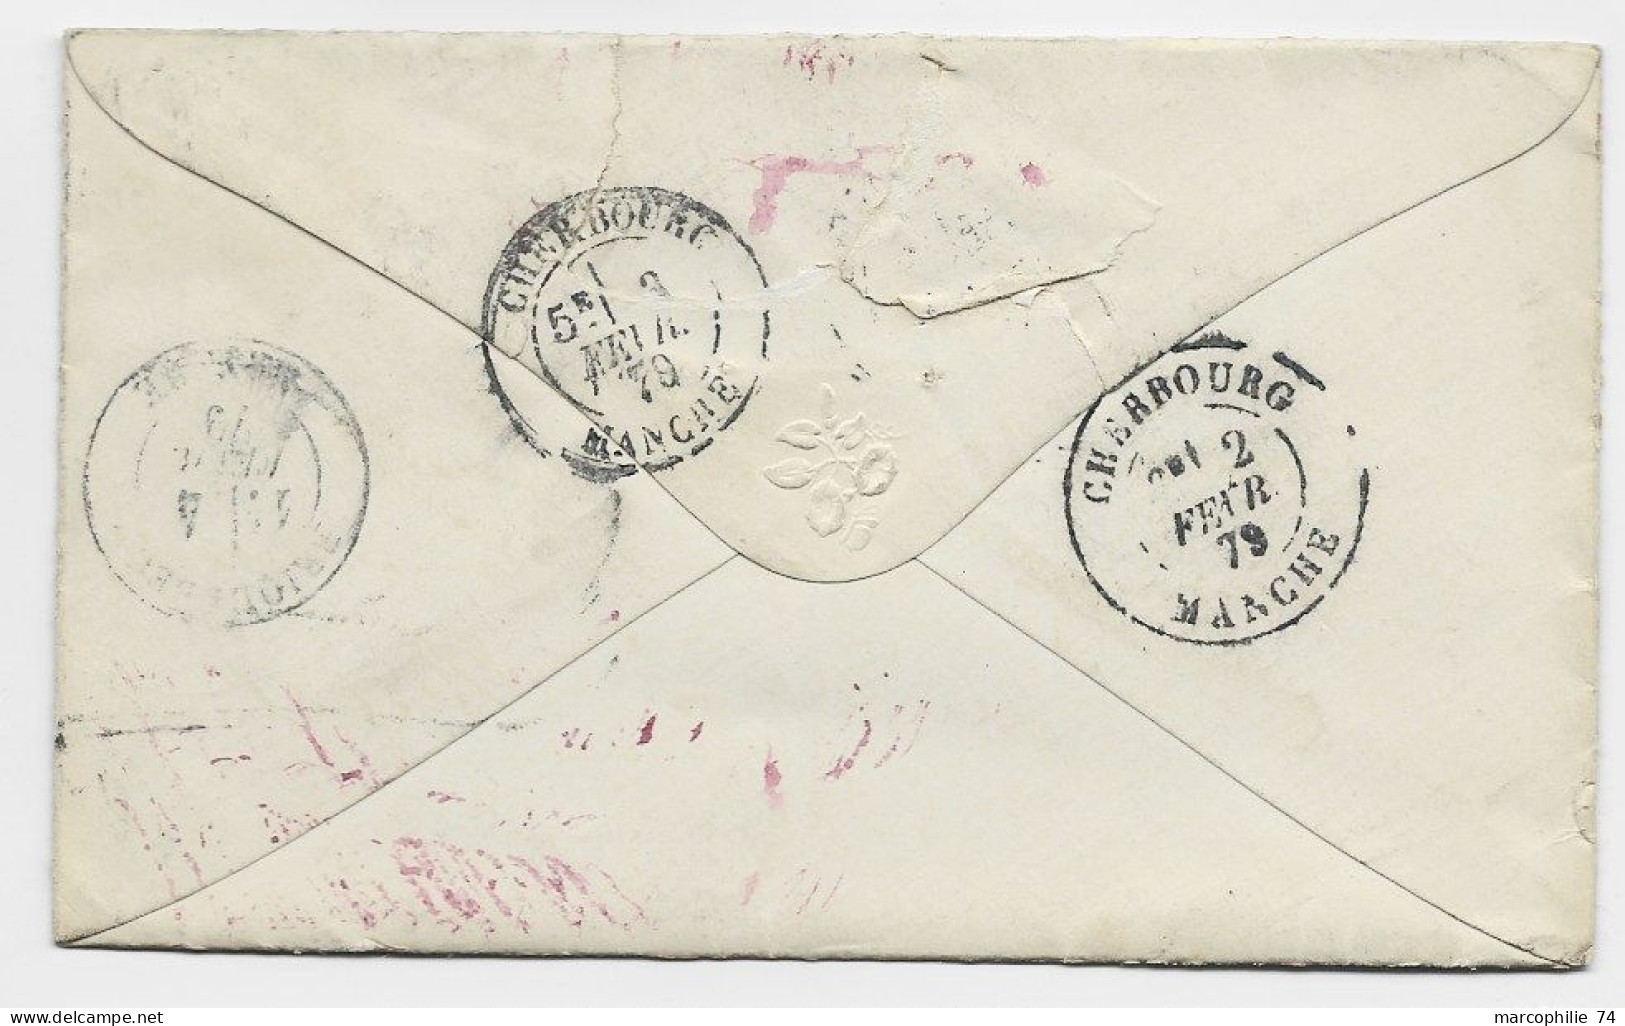 FRANCE SAGE 15C LETTRE TYPE 17 MATHA 1 FEVR 1879 ADRESSEE JULIEN VIAUD PIERRE LOTI A BORD MOSELLE CHERBOURG REEX MANCHE - 1877-1920: Semi Modern Period